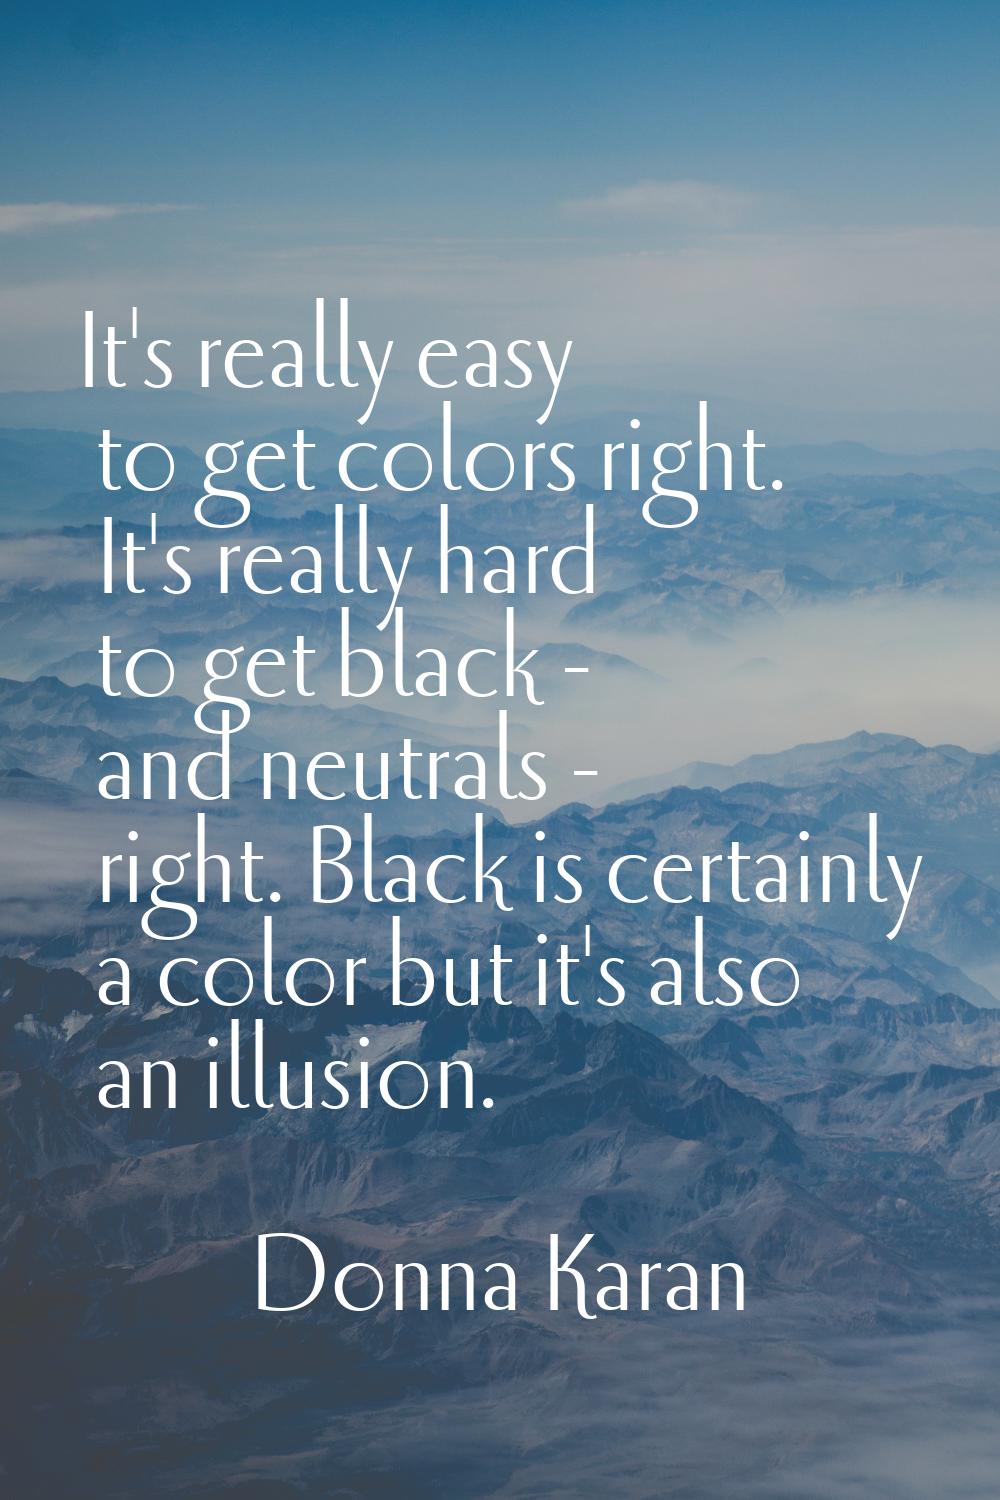 It's really easy to get colors right. It's really hard to get black - and neutrals - right. Black i